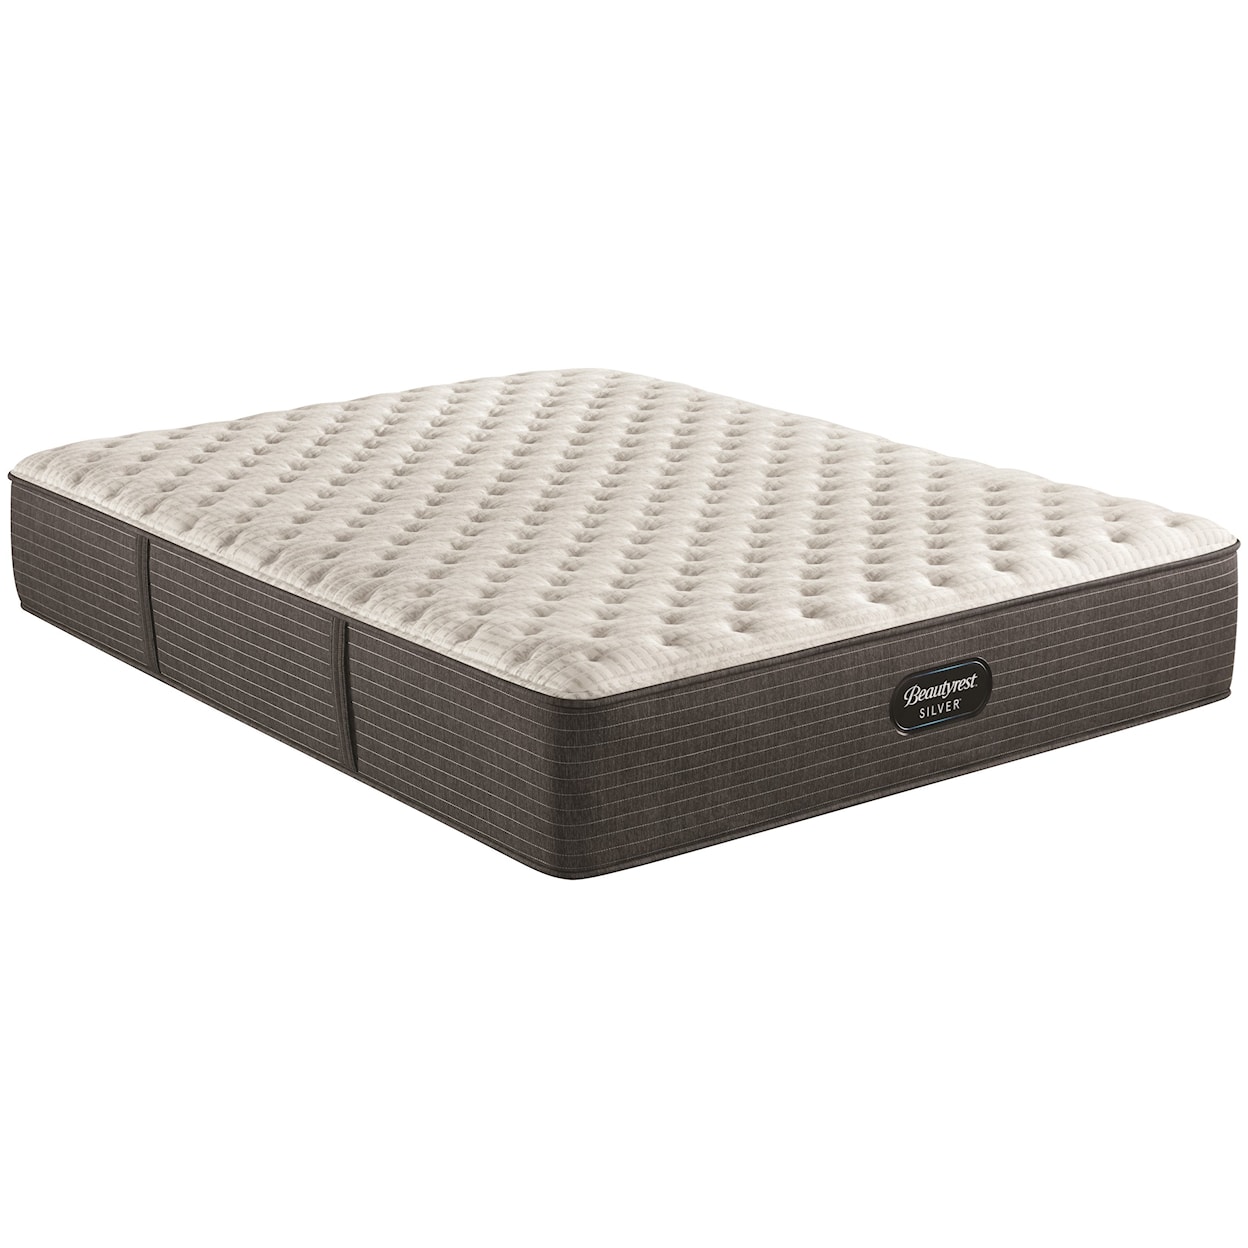 Beautyrest BRS900-C XF King 13 3/4" Pocketed Coil Mattress